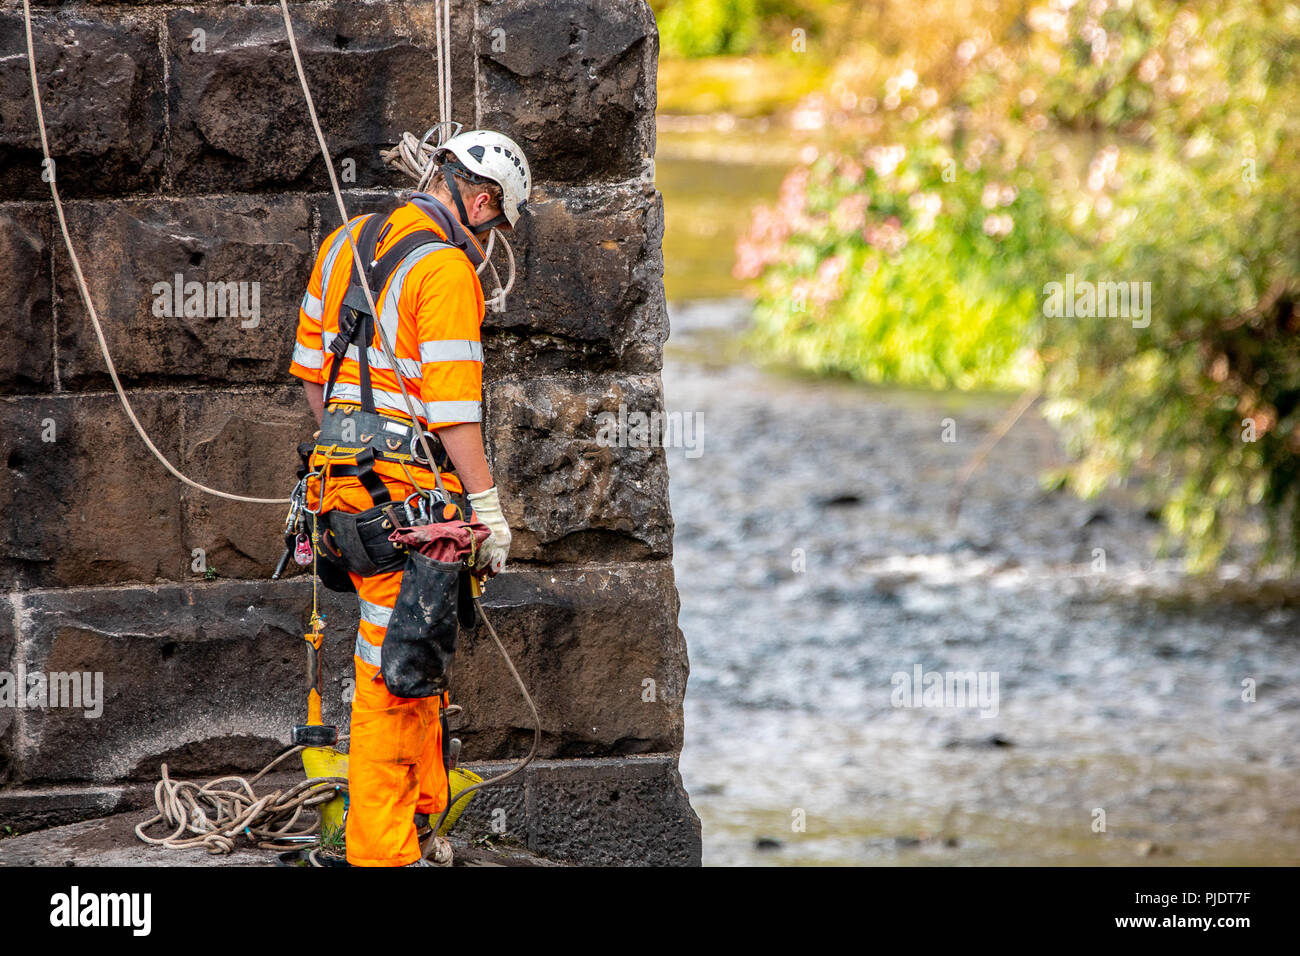 Rail bridge worker attached to safety harness wearing full PPE. Stock Photo